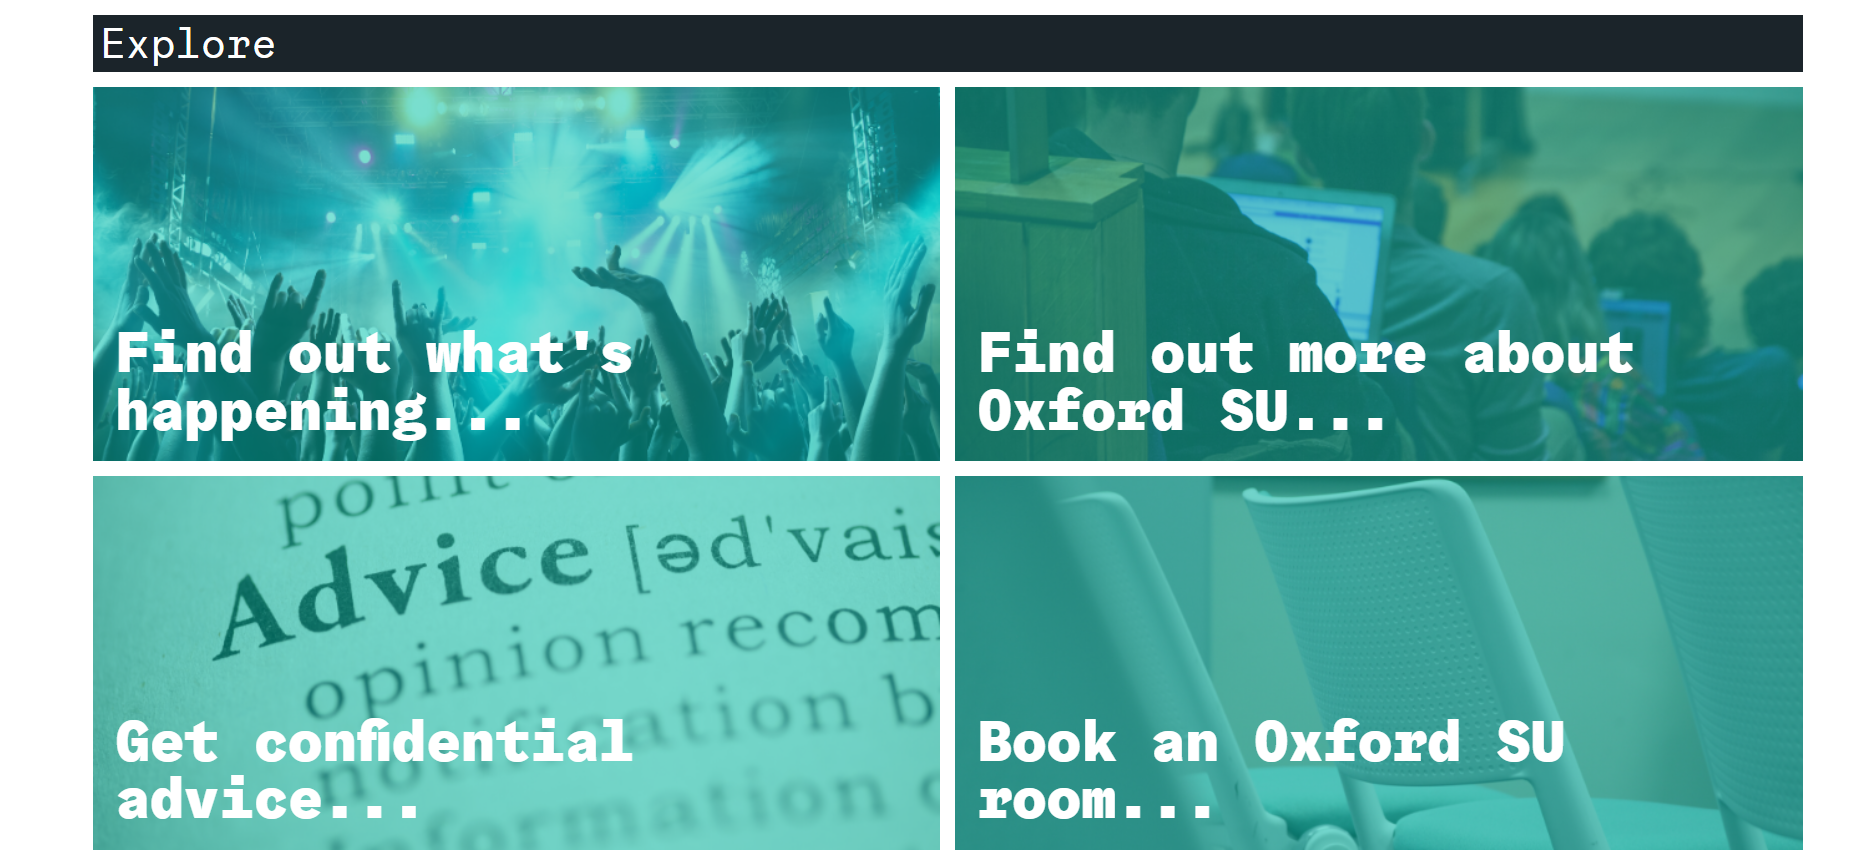 Oxford Student Union web page using image navigation to explore participation opportunities